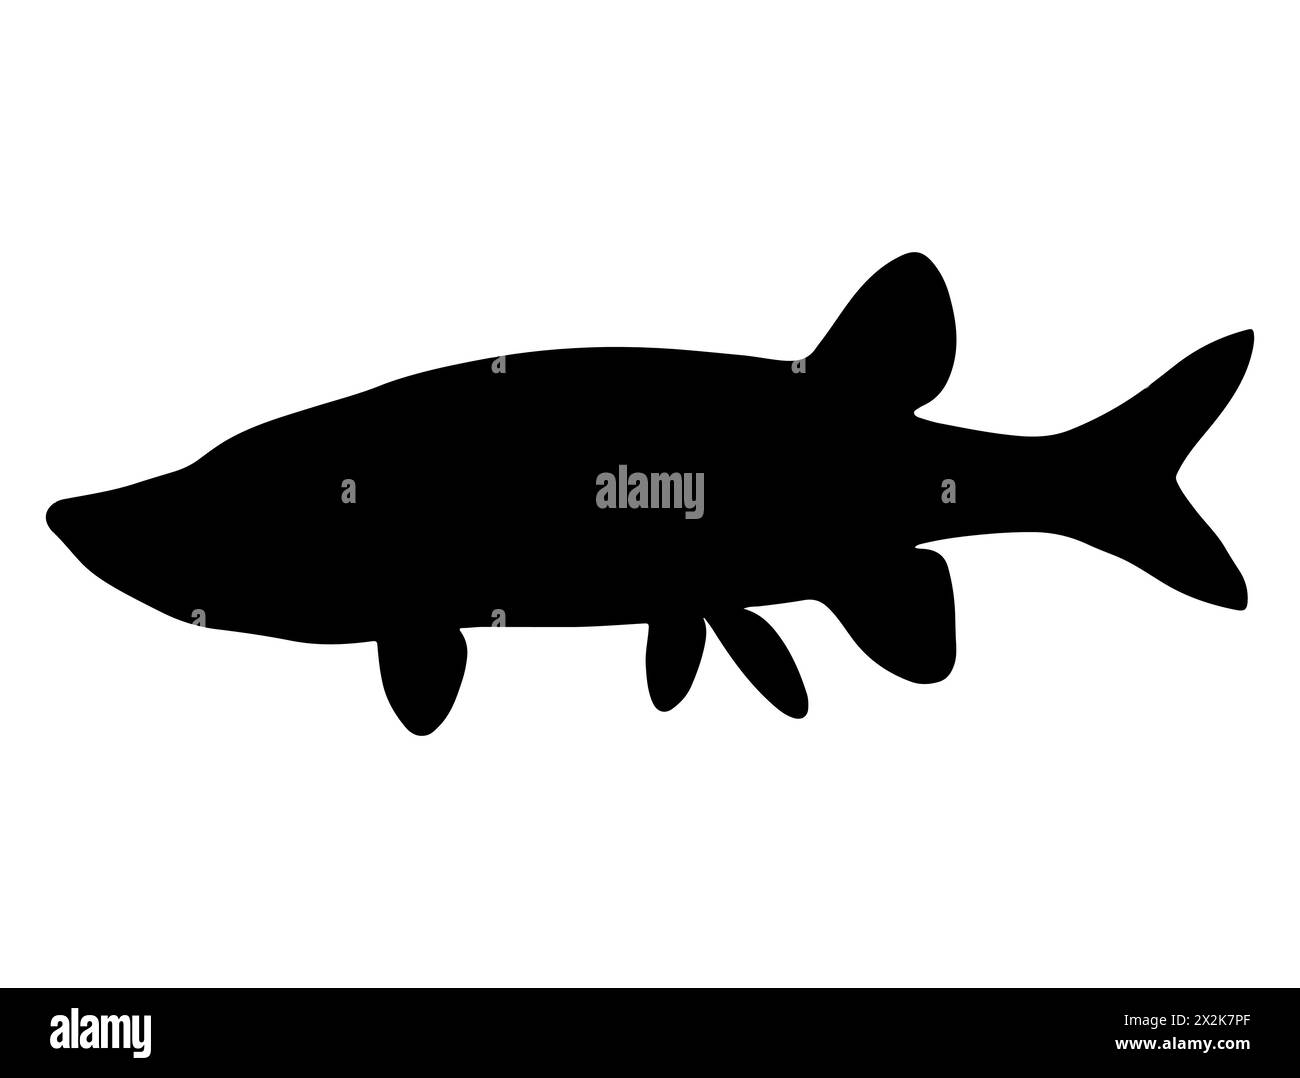 Northern pike fish silhouette vector art Stock Vector